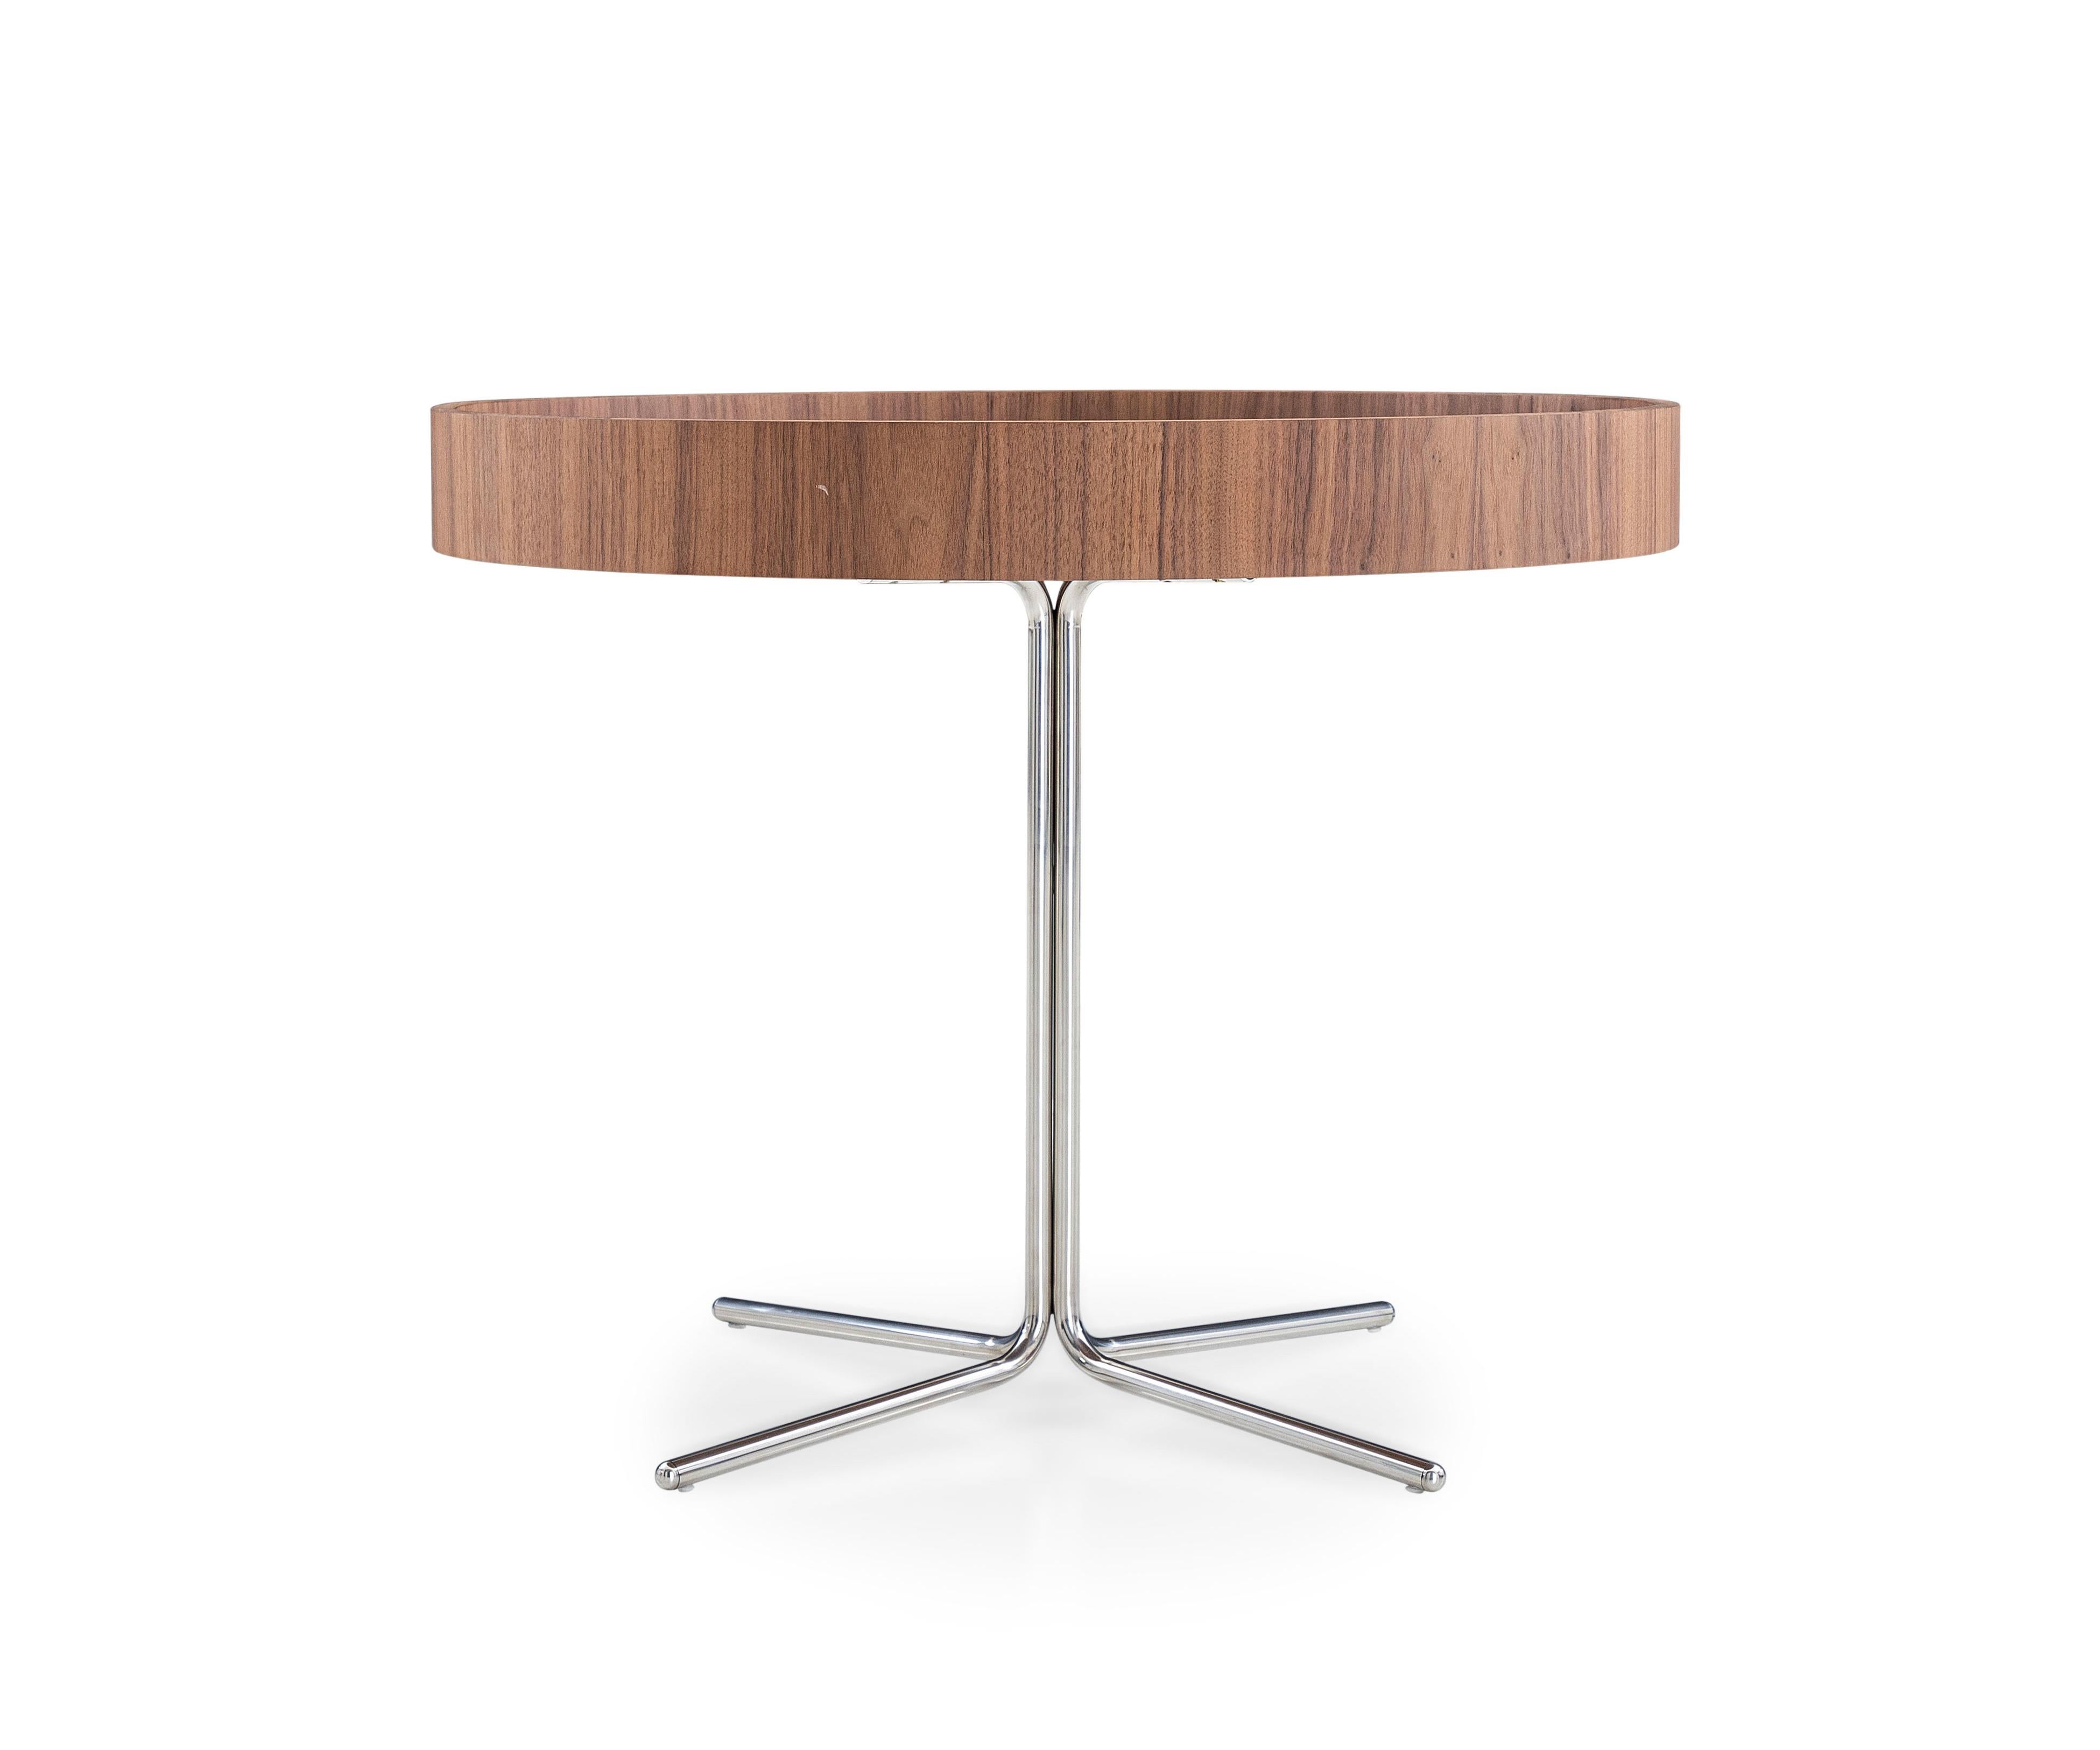 The stunning Regia occasional table consists of a tabletop in brown imperial glass, a walnut rim, and stainless steel legs with a polished finish. The Regia table is yet another minimalist or contemporary fashion statement from Uultis that will help